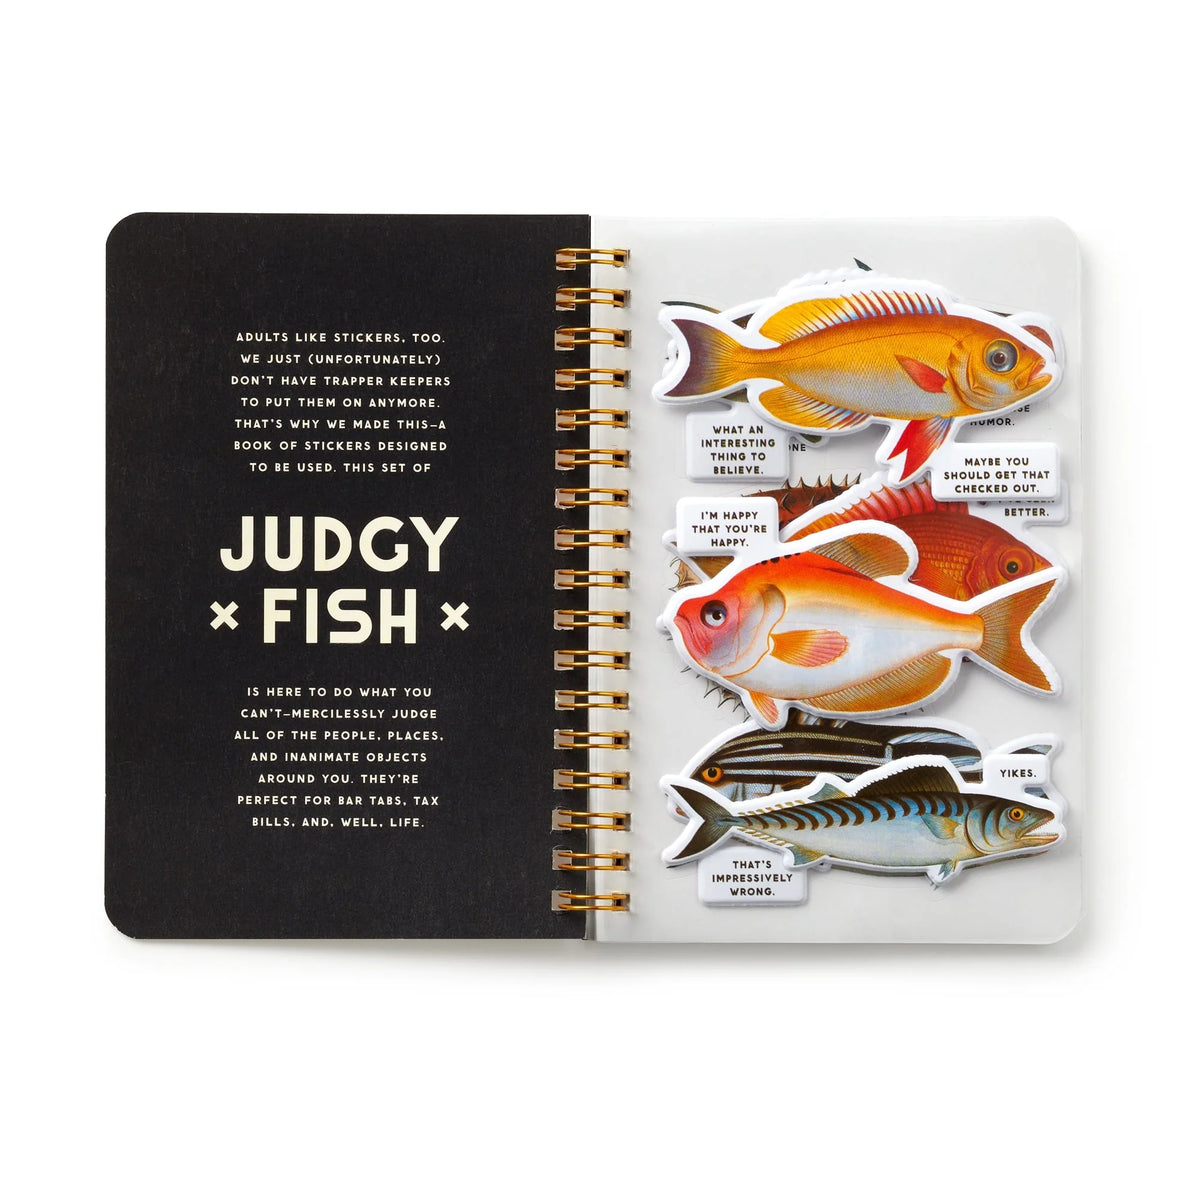 Judgy Fish Sticker Book by brass monkey at penny black - showing stickers